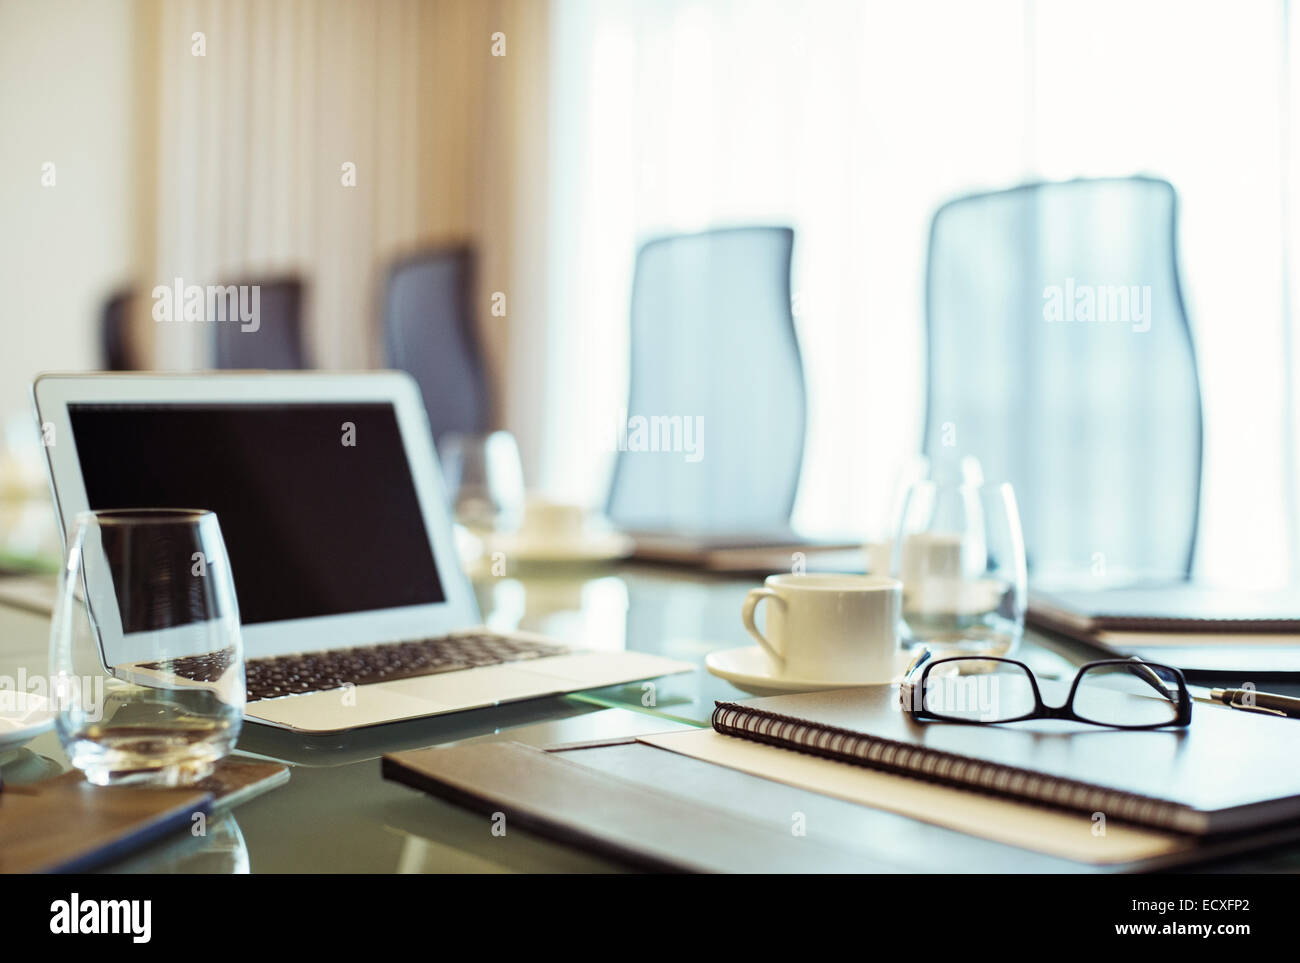 Laptop, eyeglasses and diary on conference table in empty conference room Stock Photo